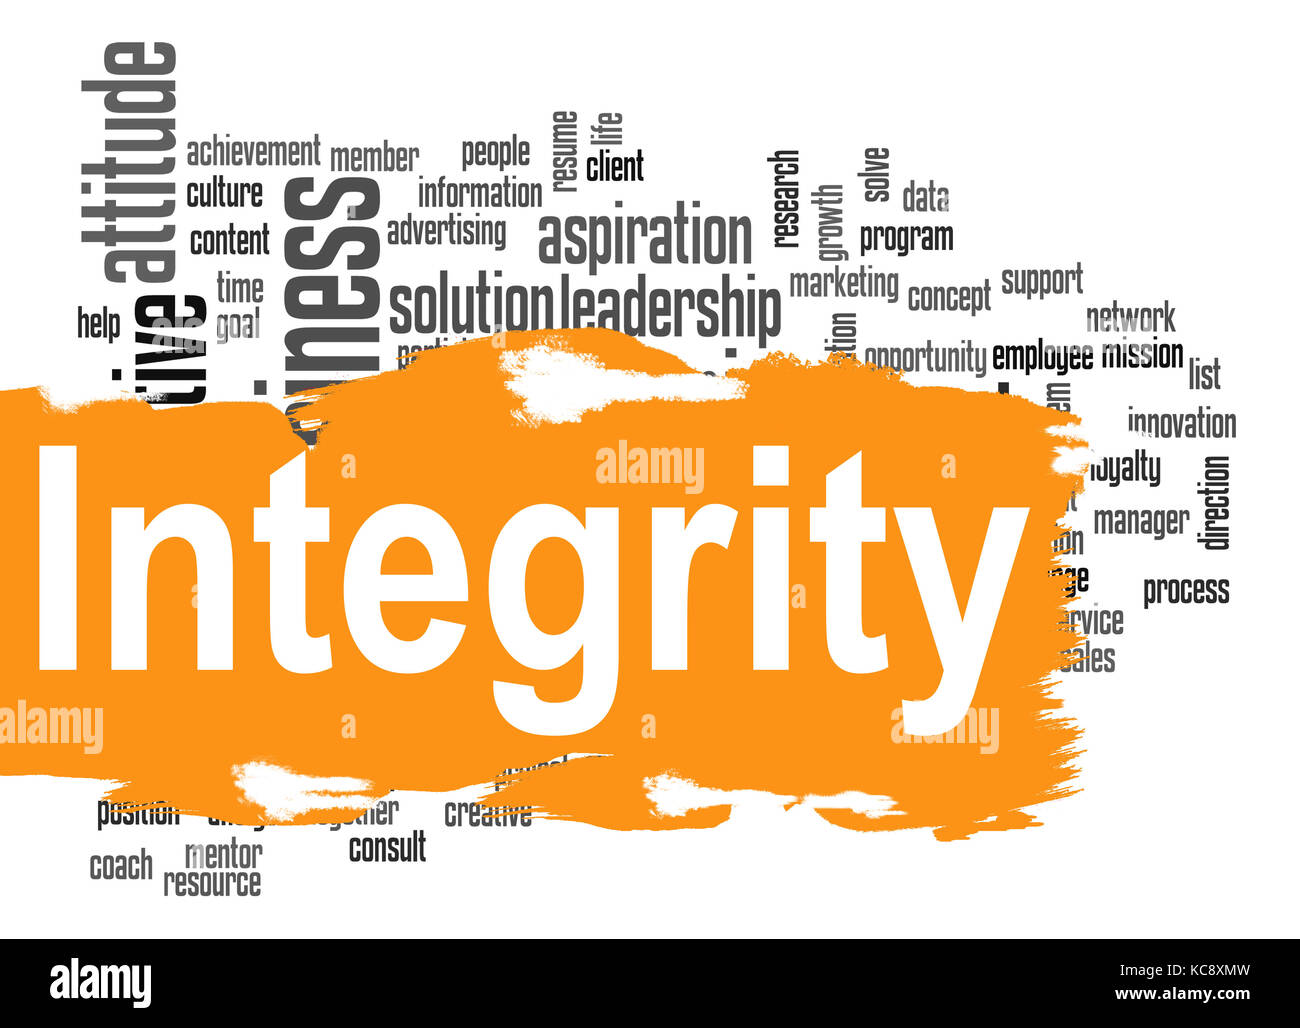 Integrity Plus download the new